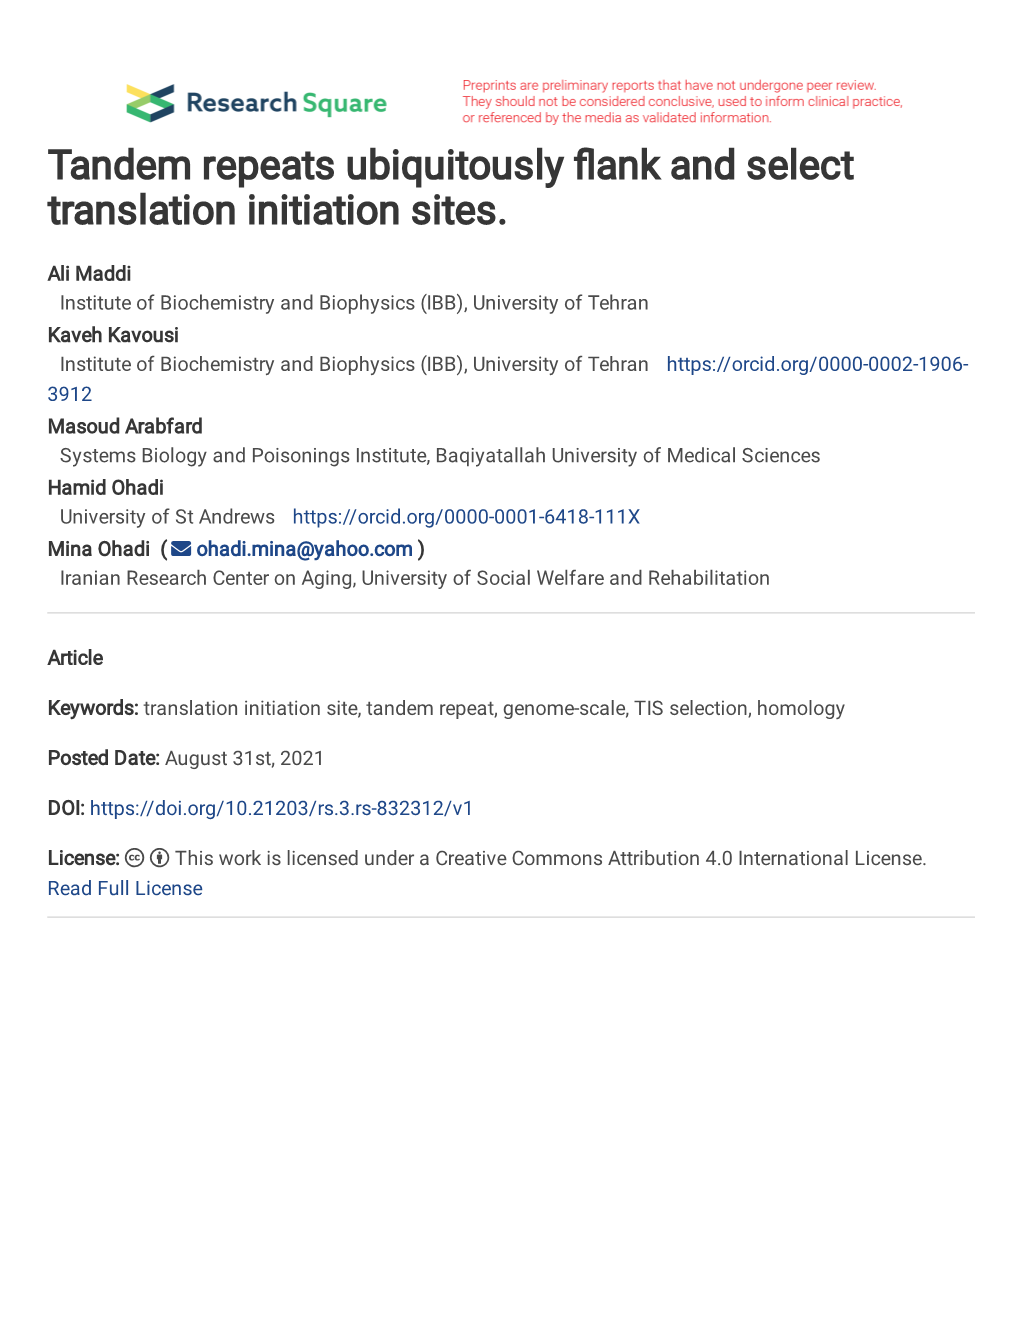 Tandem Repeats Ubiquitously Ank and Select Translation Initiation Sites